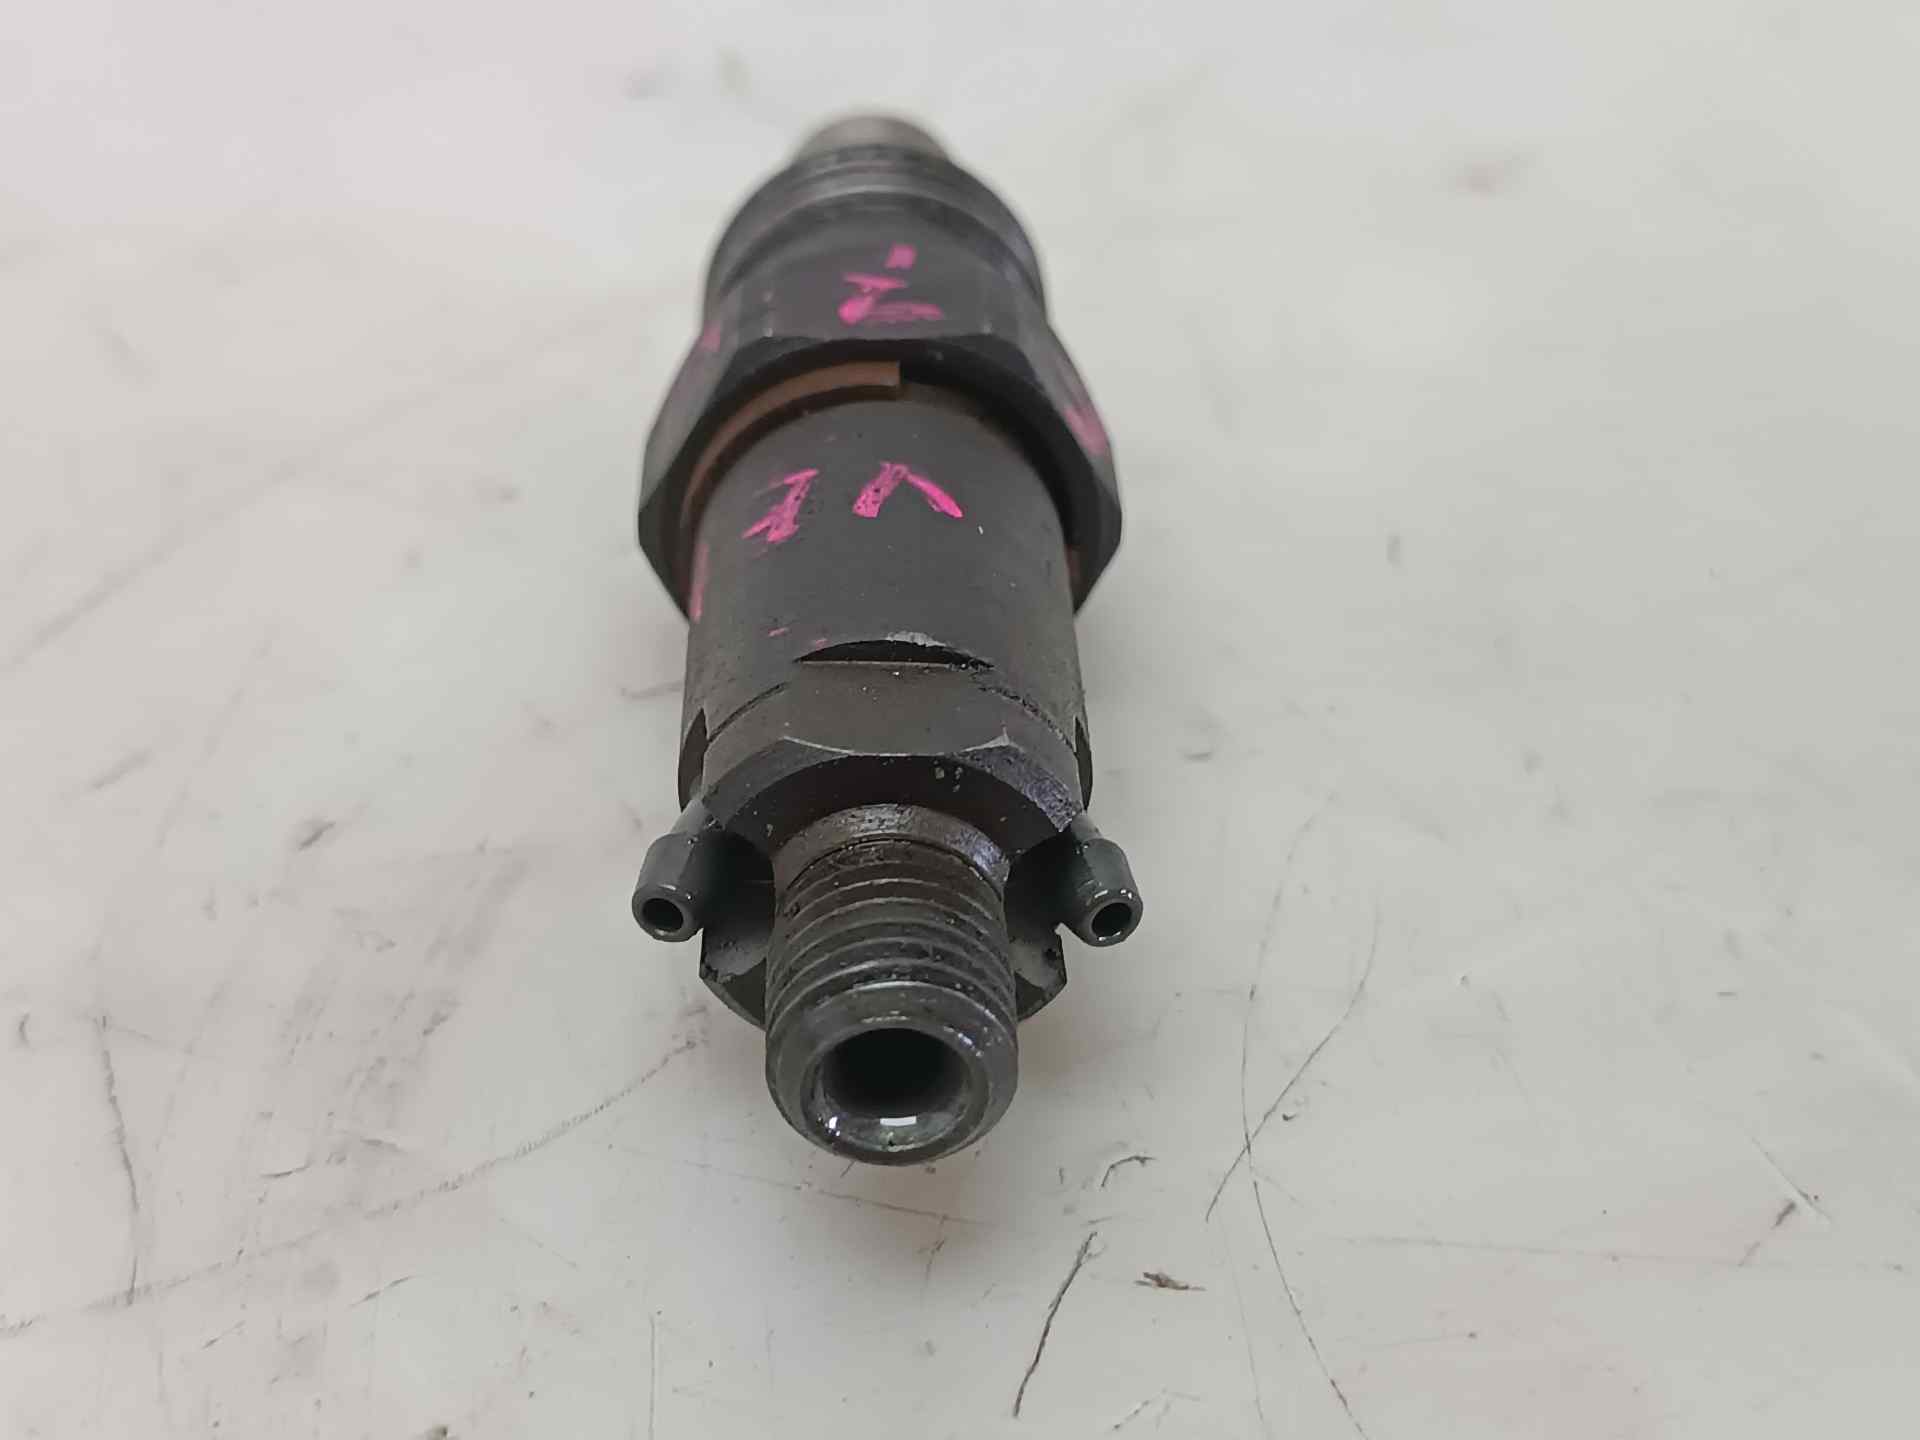 RENAULT Clio 3 generation (2005-2012) Fuel Injector LCR6735405, LCR6735405 24584549